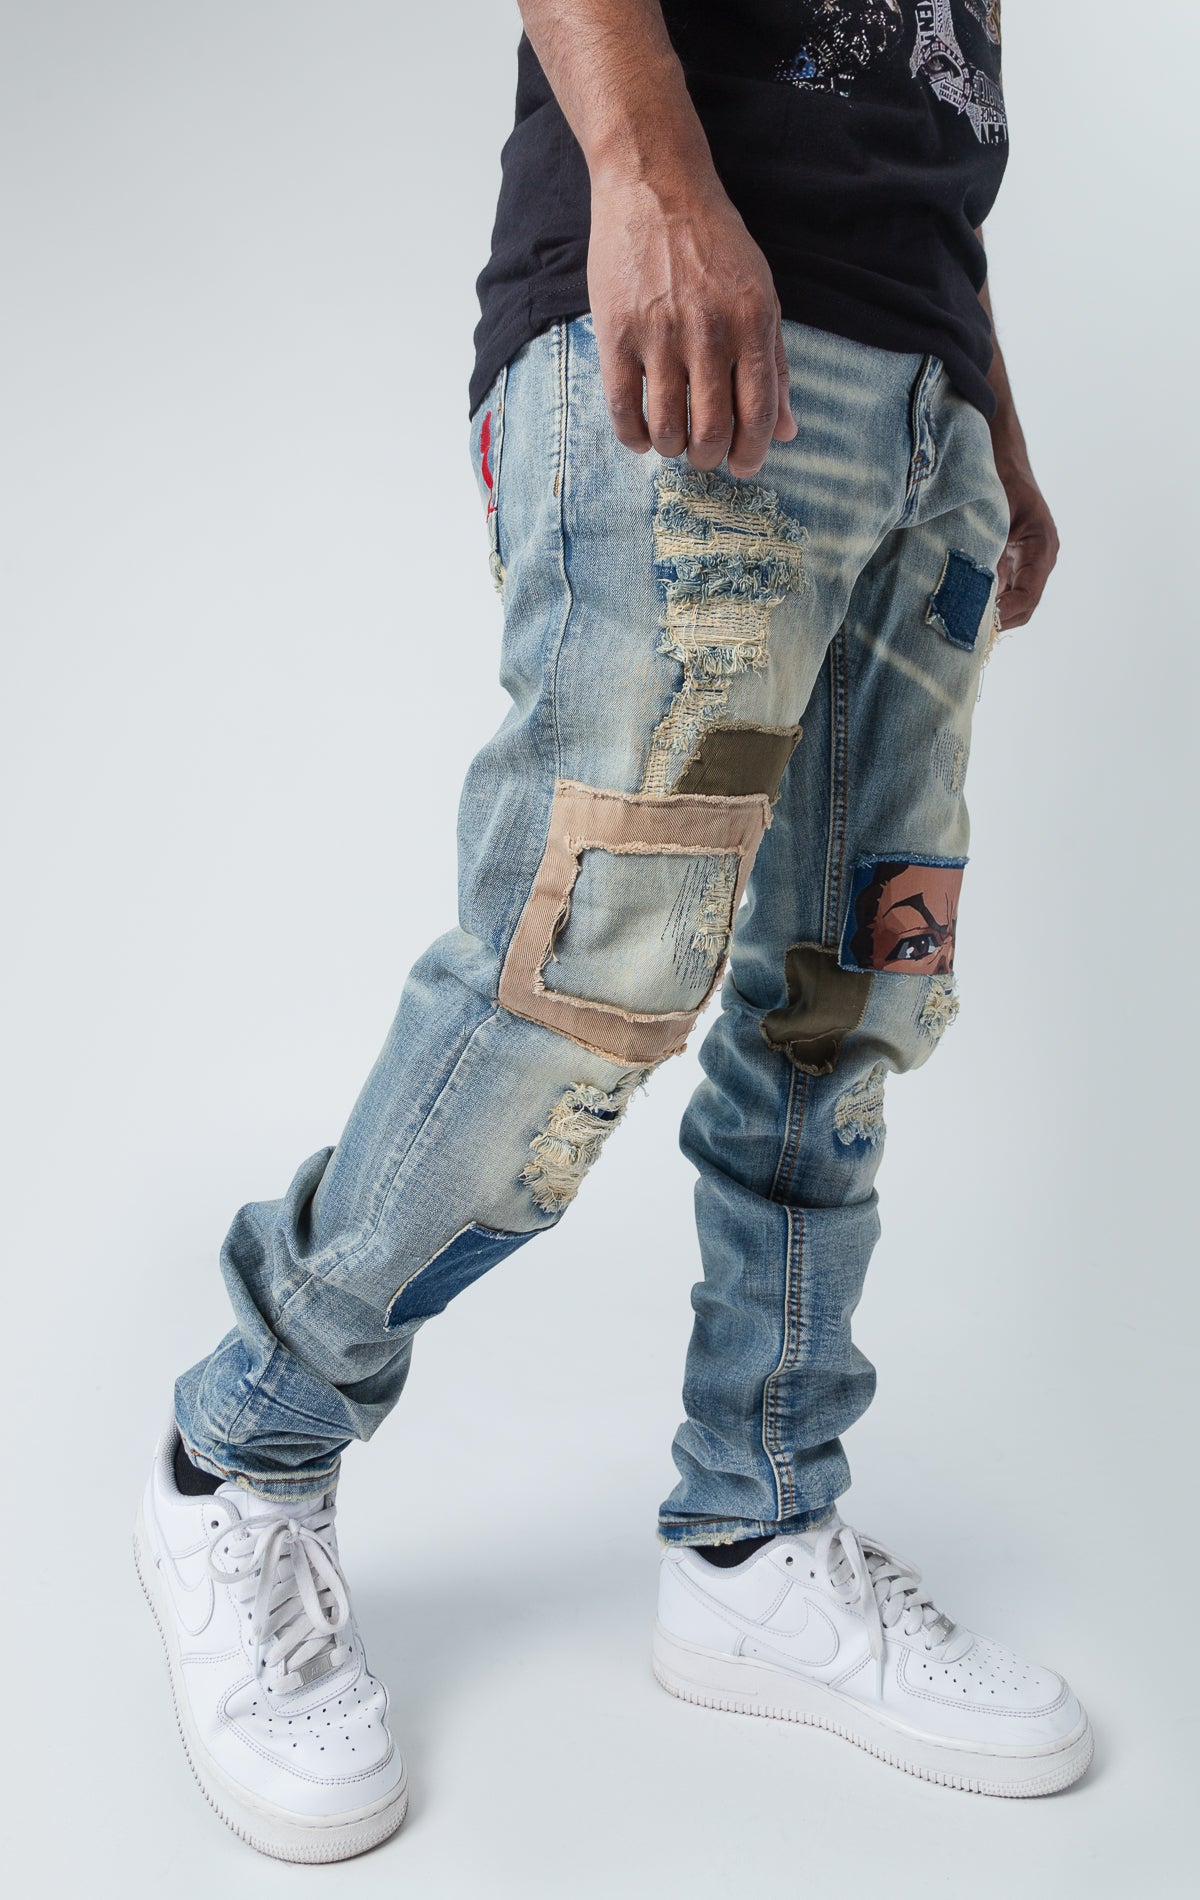 slim fit denim stretch pants, with indigo wash and rips. Features include Riley Face Knee HitInside, Huey & Riley Print Pockets, a Boondocks Logo Back Patch, a Huey Embroidered Silhouette, a Boondocks Metal Engraved Zipper, and a Boondocks Embroidered Logo within the Zipper Area.